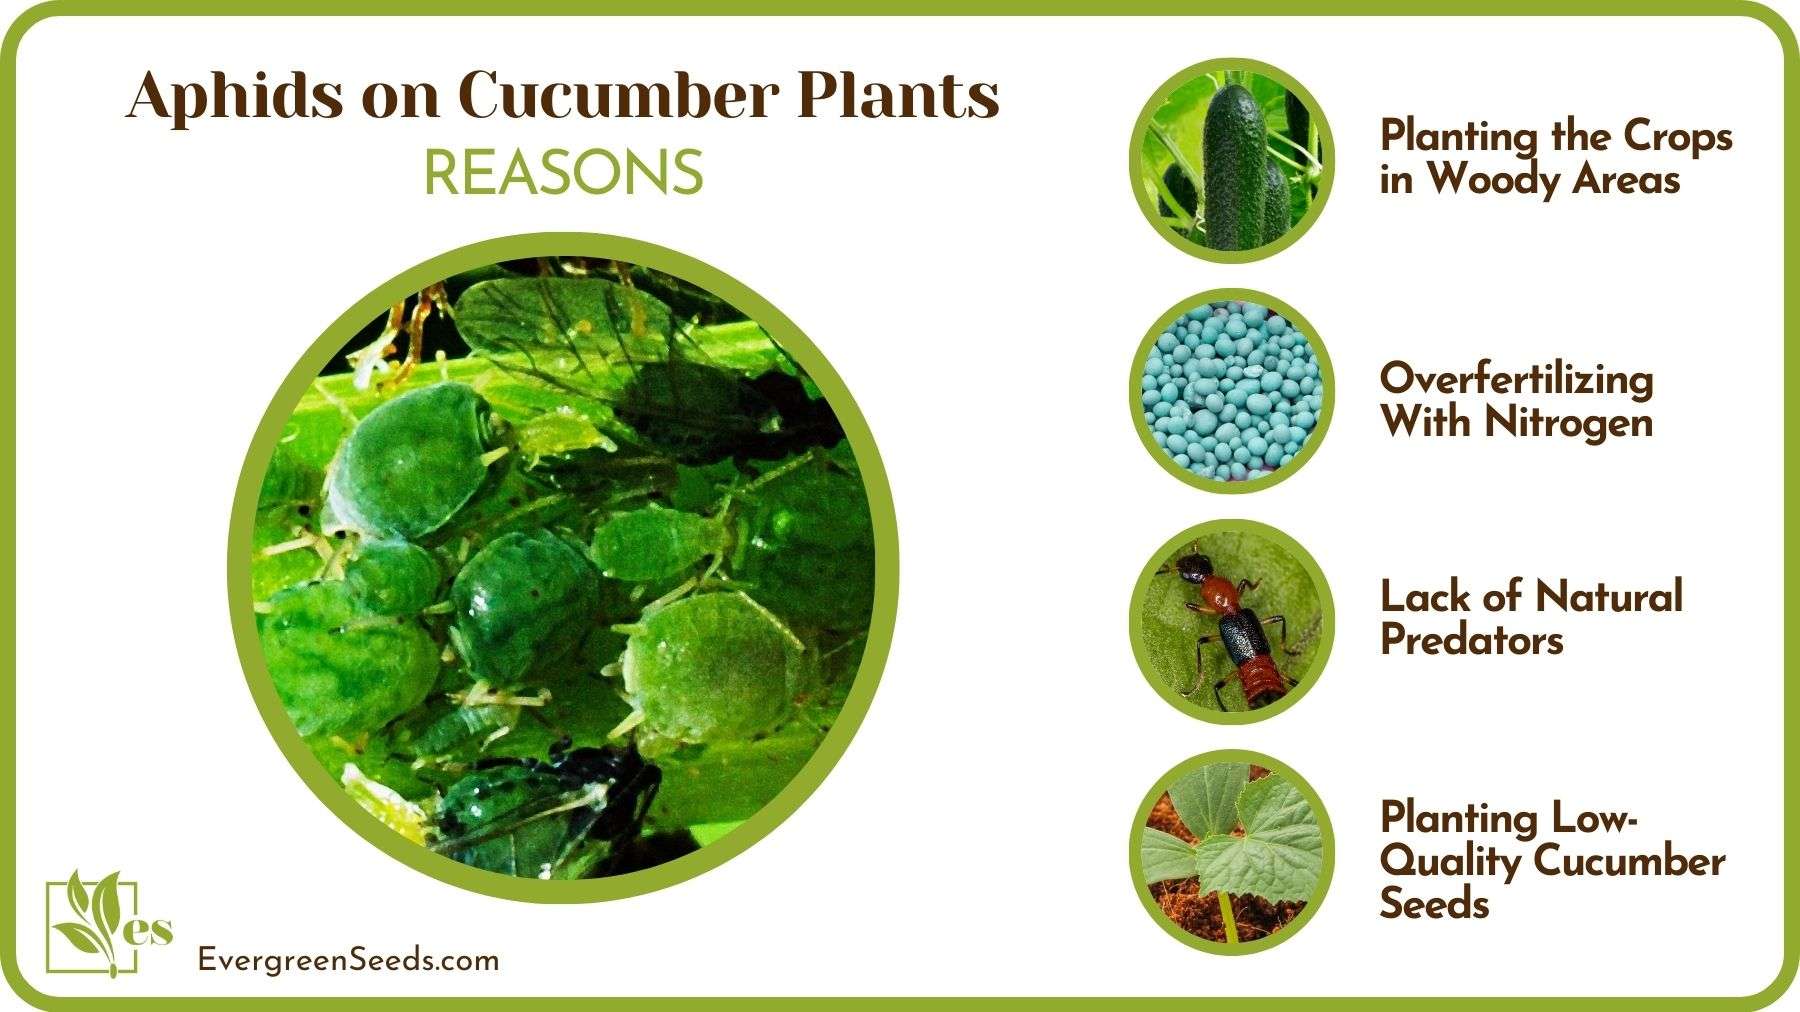 Reasons of Aphids on Cucumber Plants